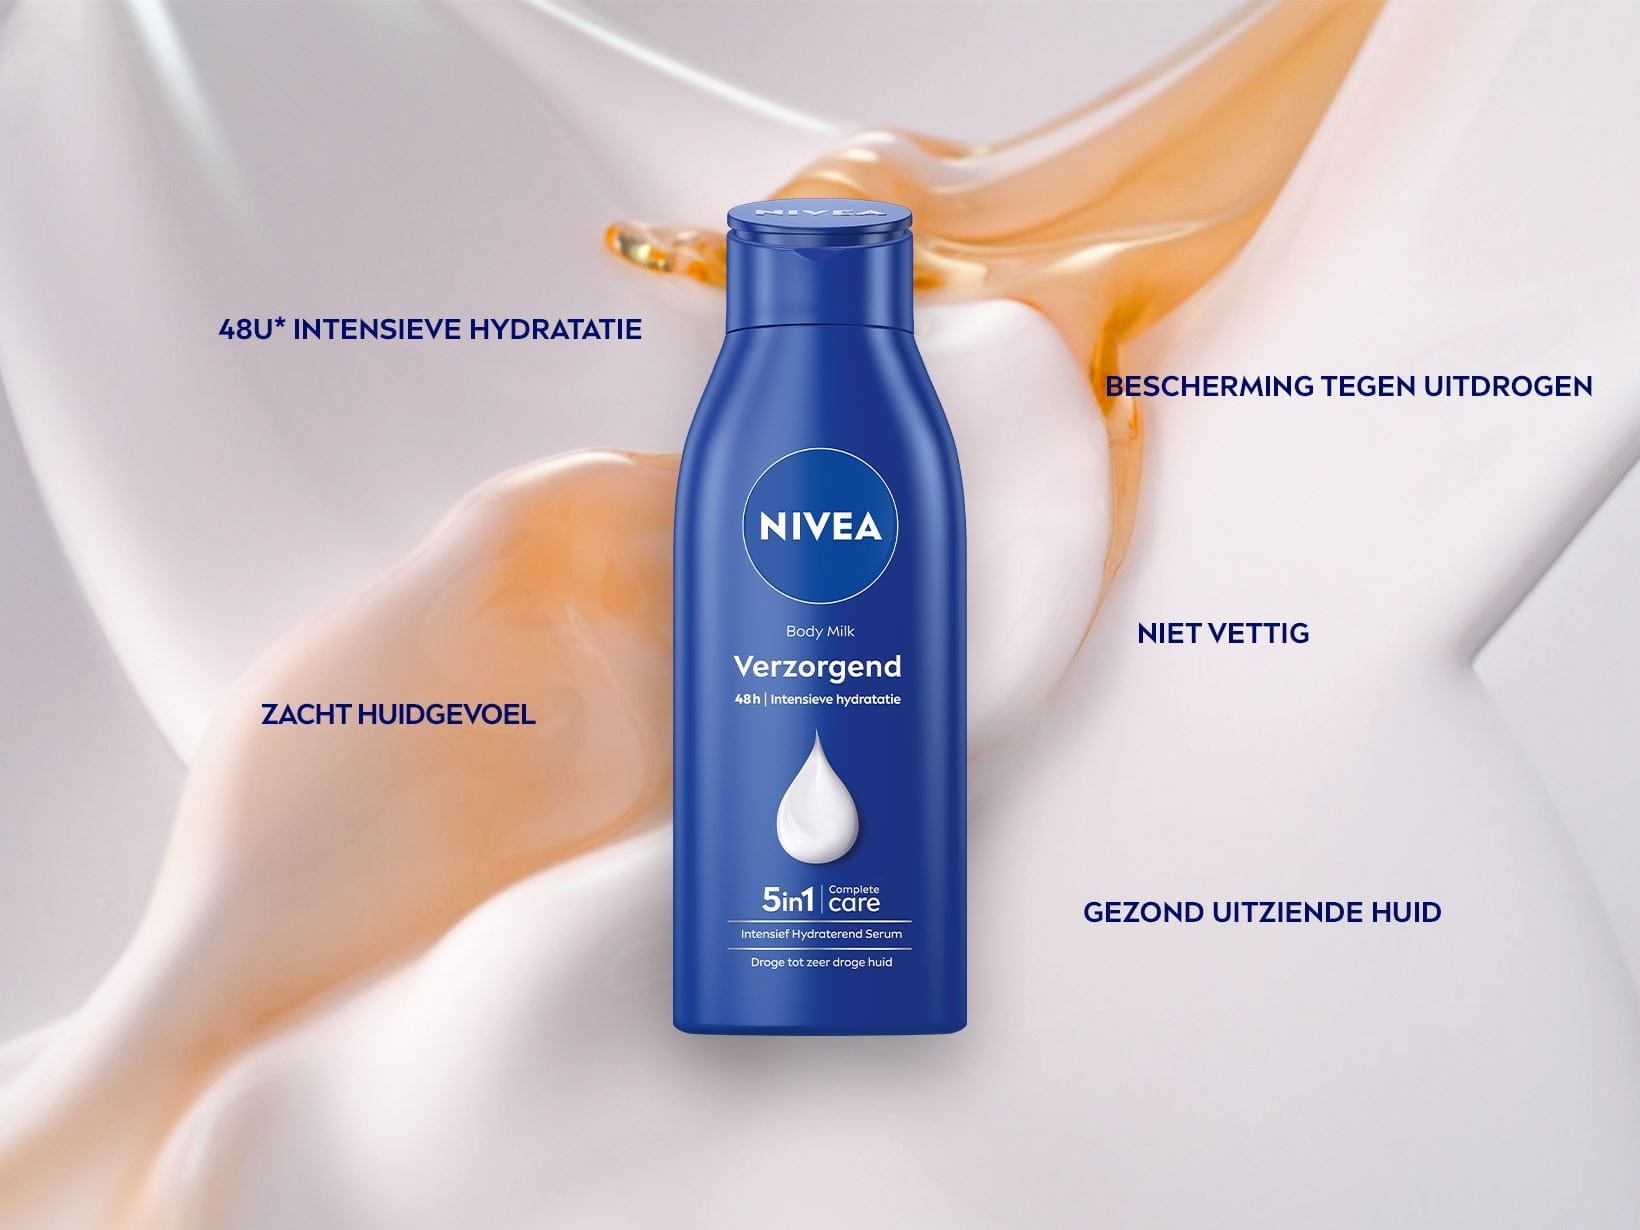 You can see here how NIVEA body moisturizer takes care of your dry skin.